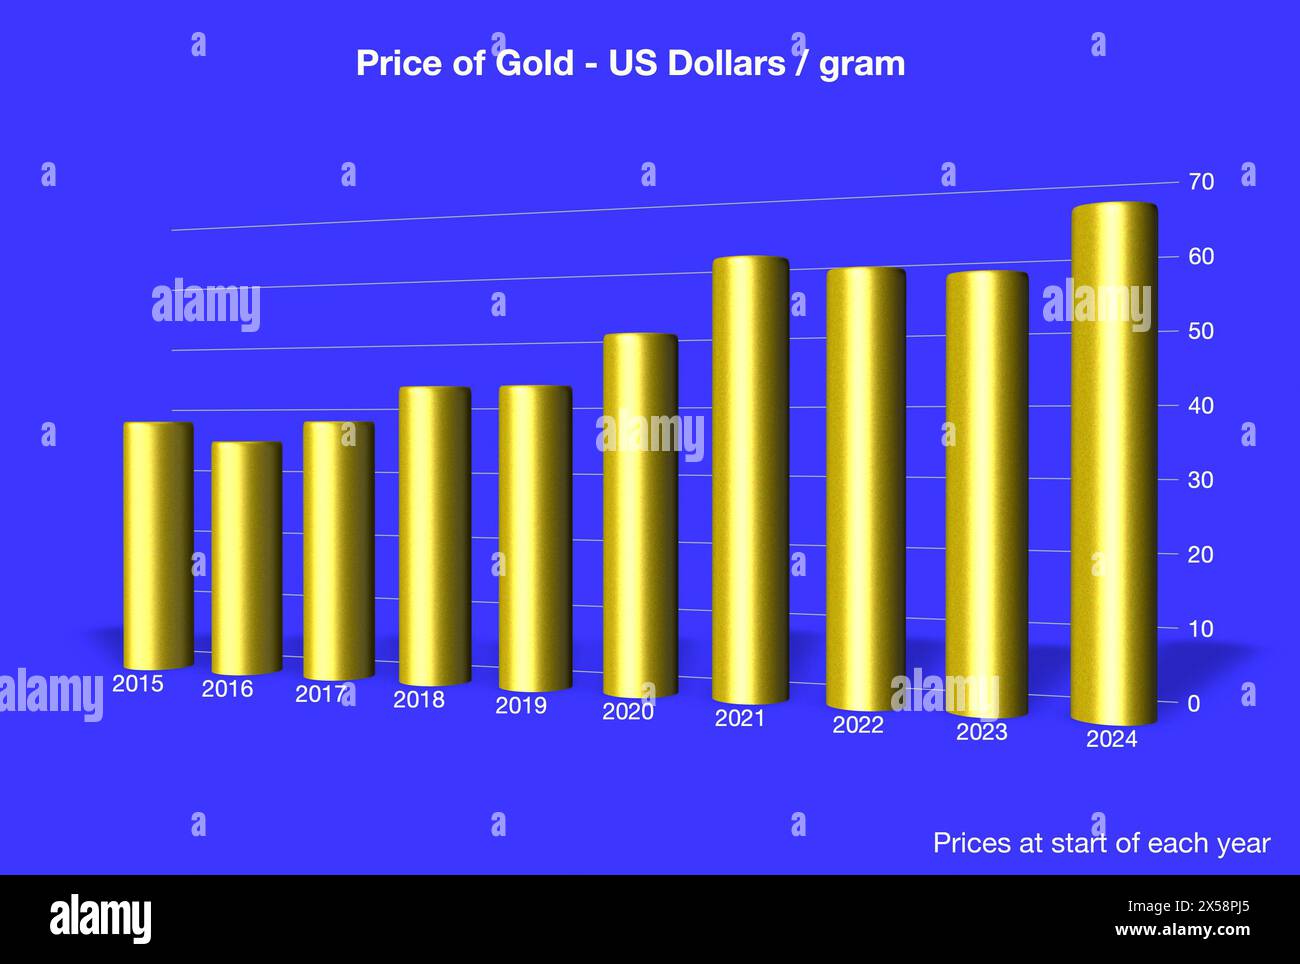 Gold price bar chart / graph with 3D effect showing actual price in US Dollars at the start of each year from 2015-2024 Stock Photo